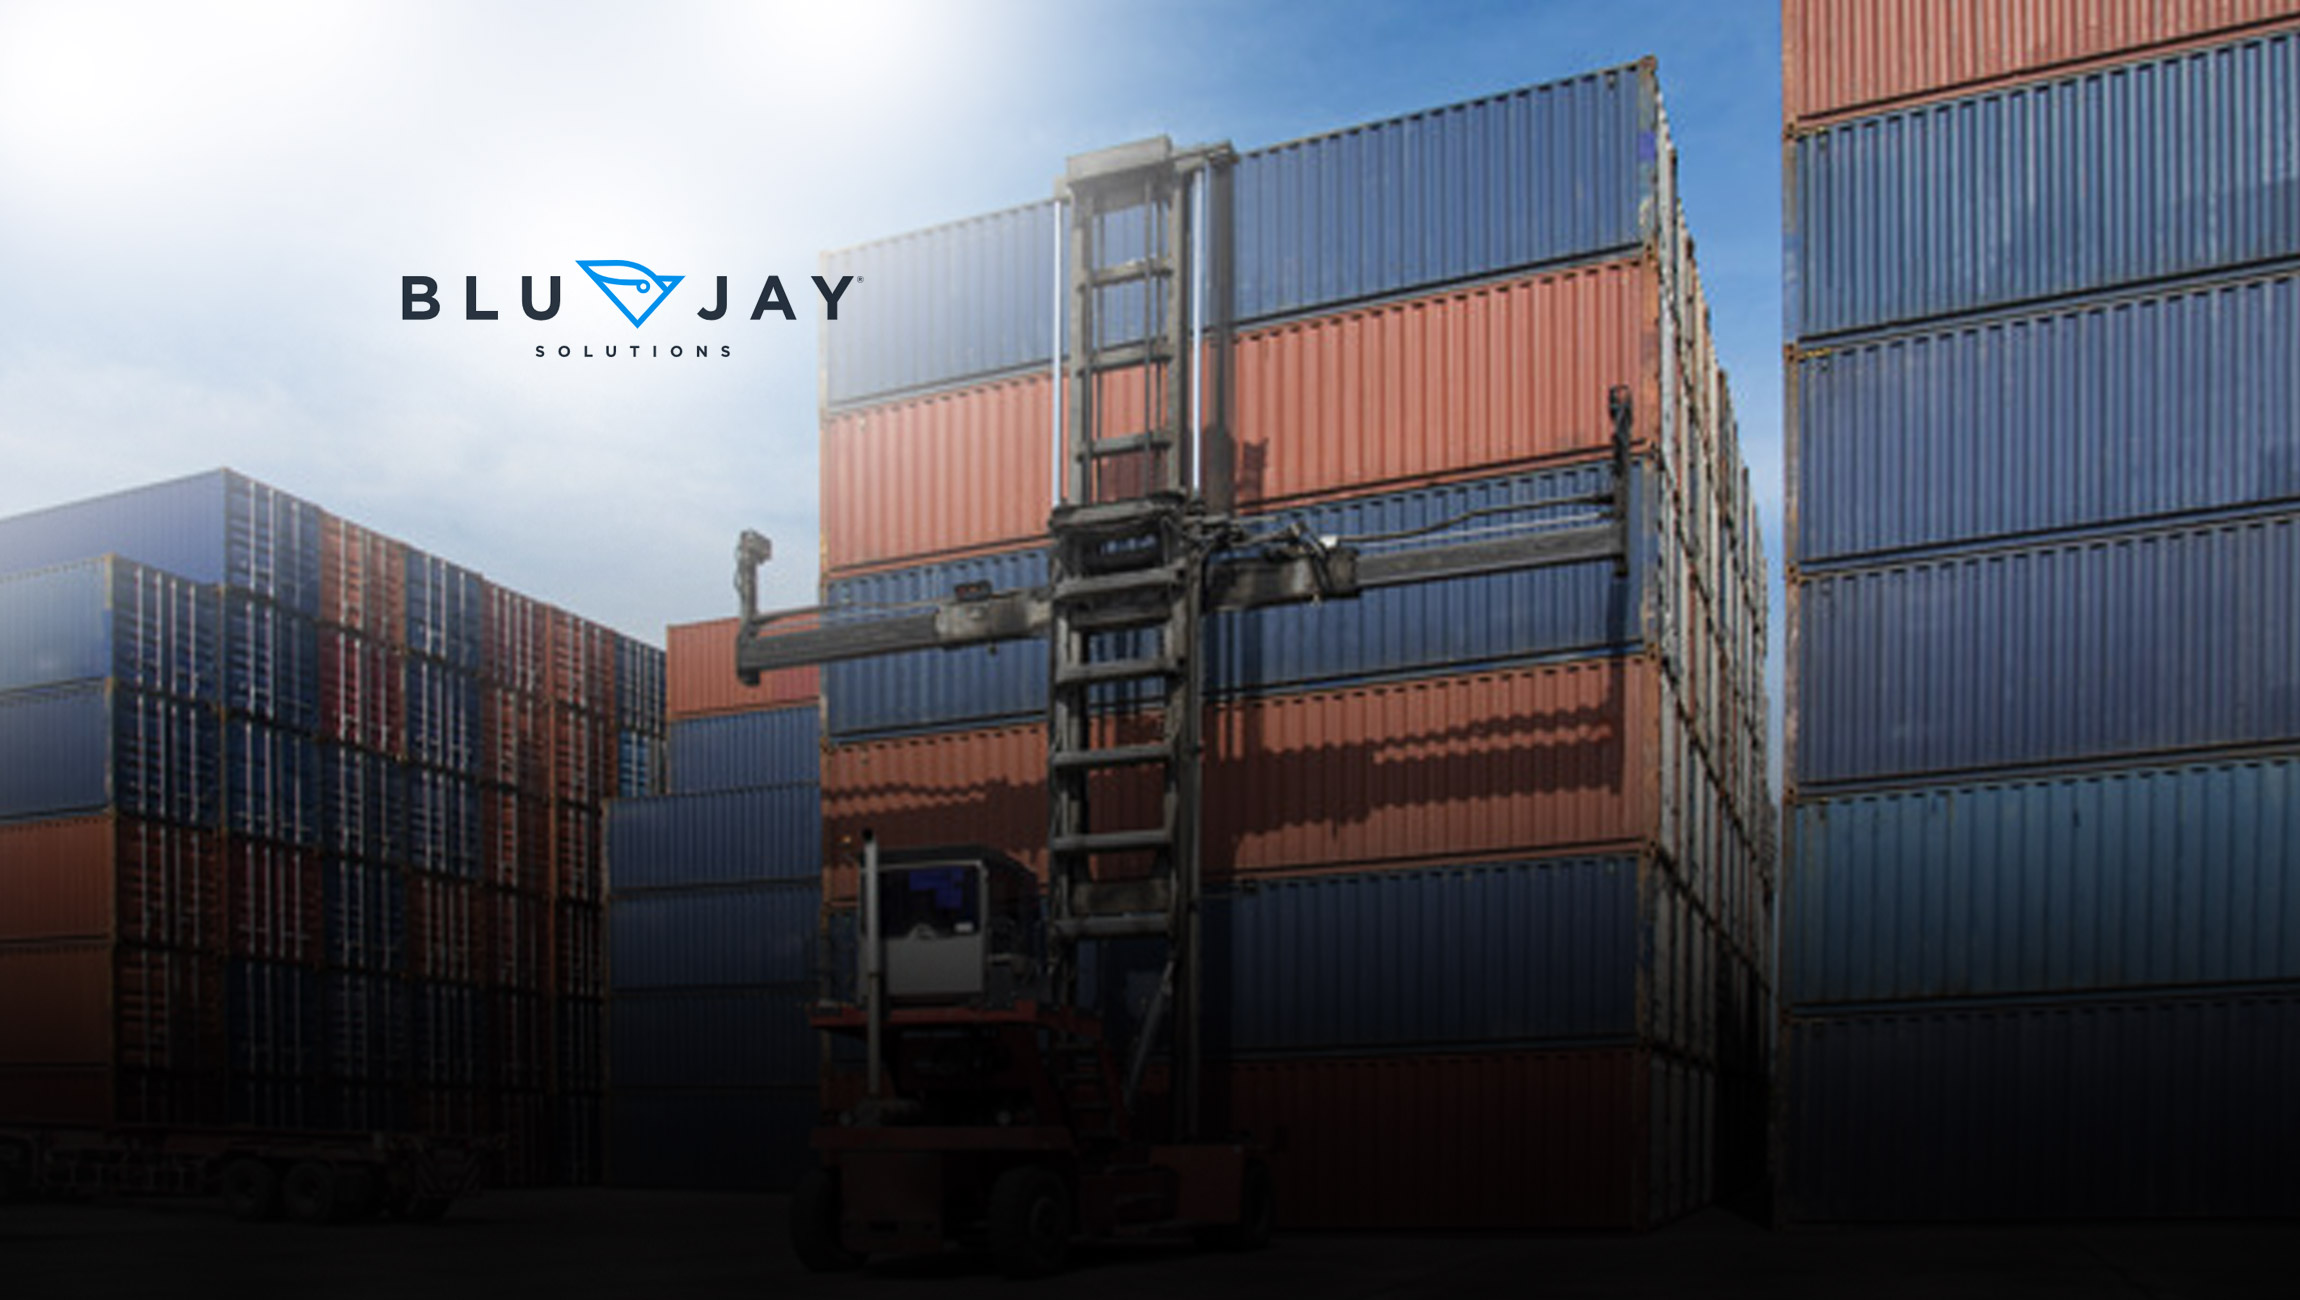 Latest Software Releases from BluJay Offer New Capabilities to Further Support Frictionless Global Trade